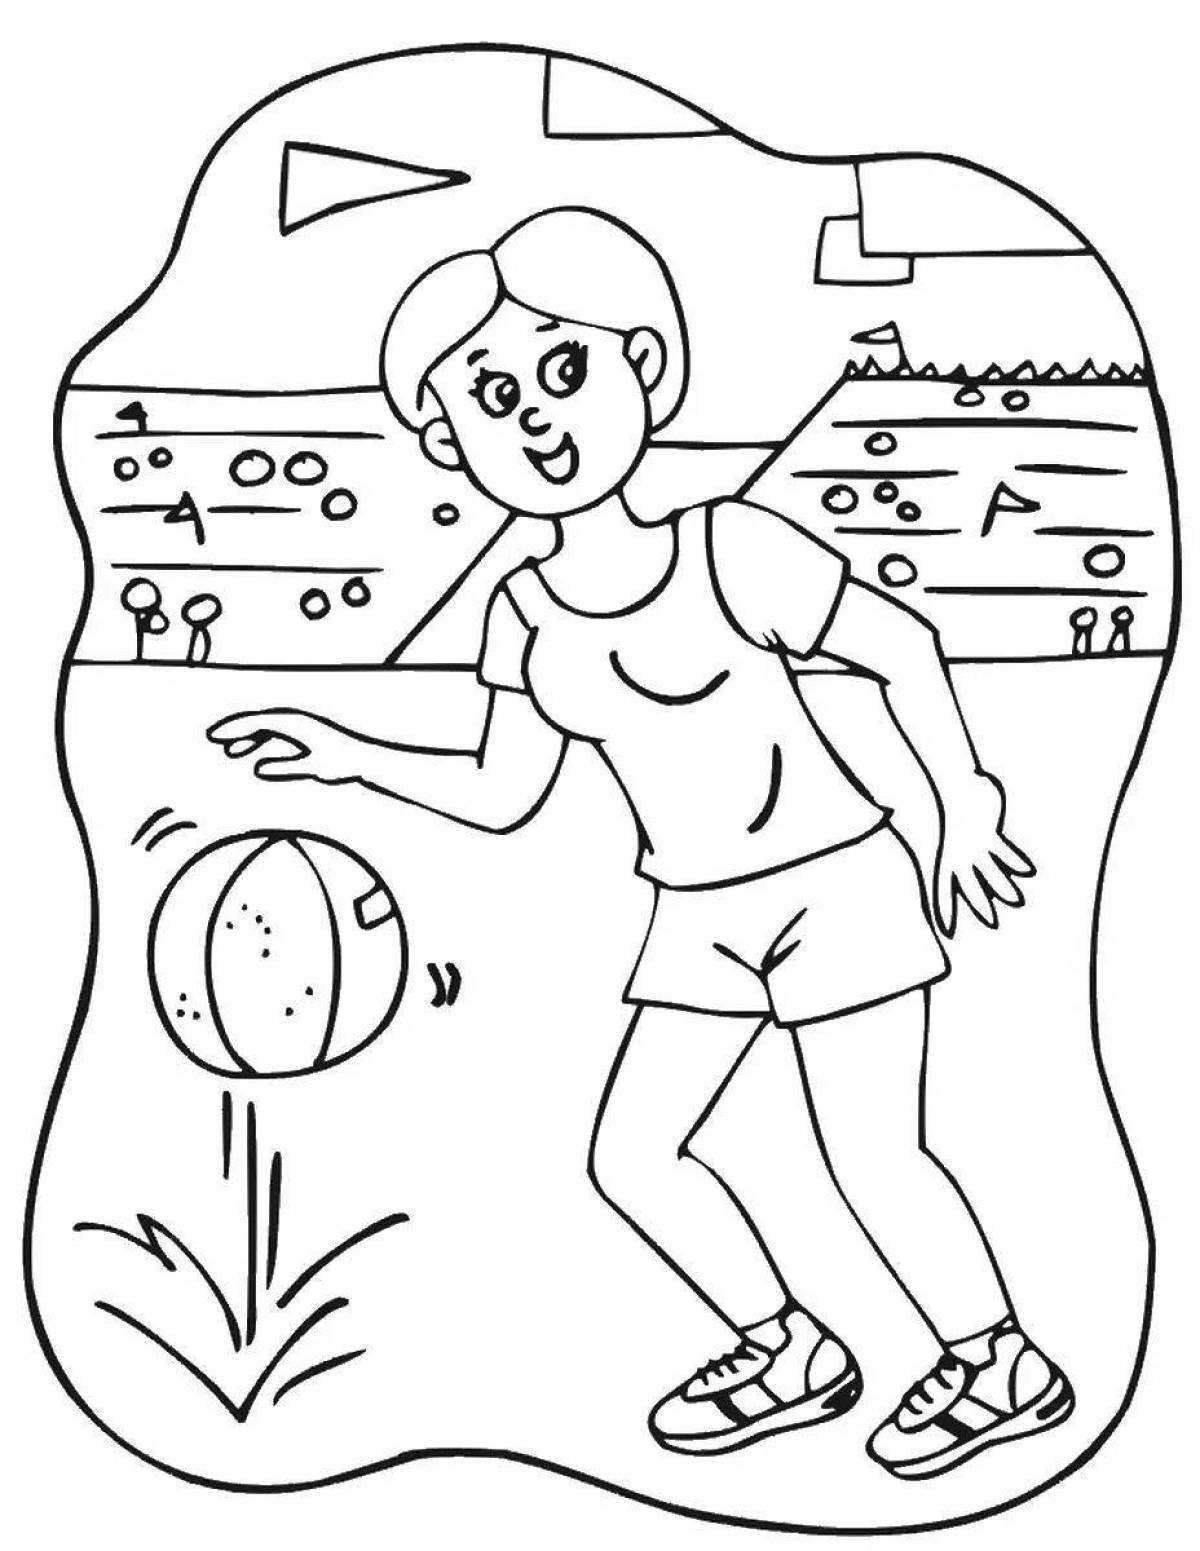 Updating the health coloring page for the elderly